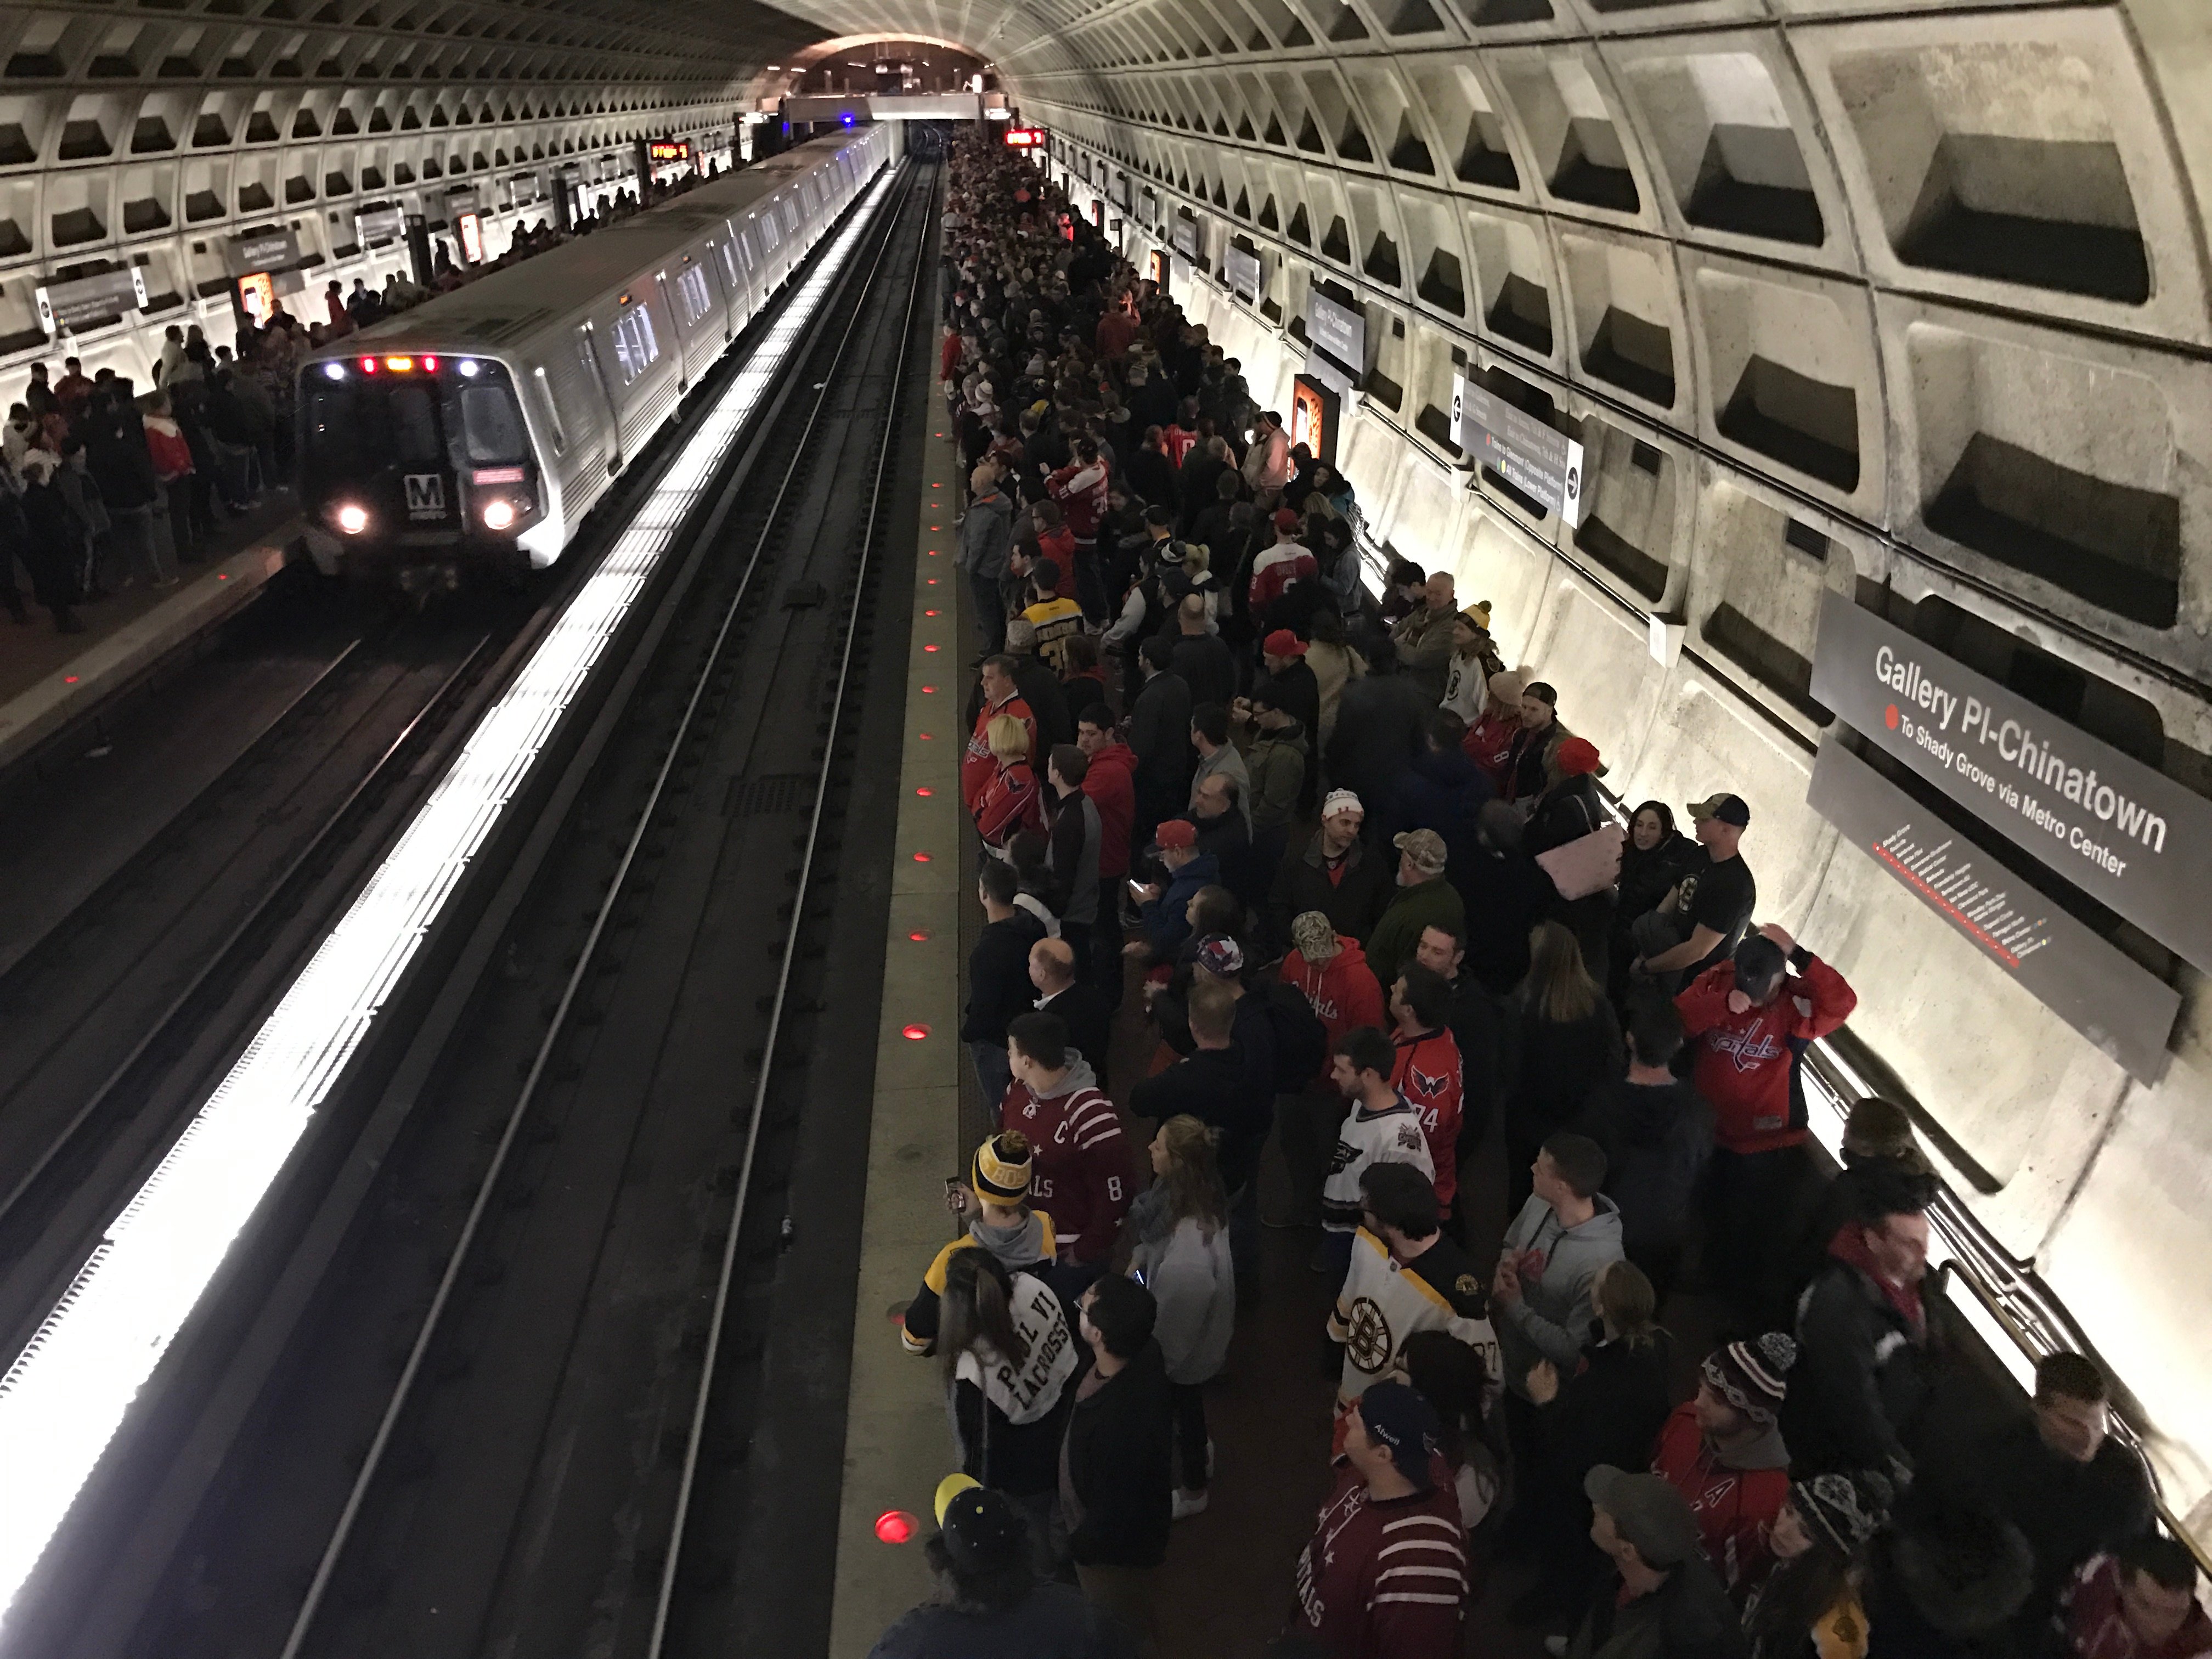 Hockey fans of the Washington Capitals team wait for a metro on February 1st, 2017 after a game at the Verizon center stadium. The Washington Metro, known colloquially as Metro and branded Metrorail, is the heavy rail rapid transit system serving the Washington, D.C. metropolitan area in the United States. It is administered by the Washington Metropolitan Area Transit Authority (WMATA), which also operates Metrobus service under the Metro name.Besides the District, Metro serves several jurisdictions in Maryland and Virginia. (DANIEL SLIM/AFP/Getty Images)